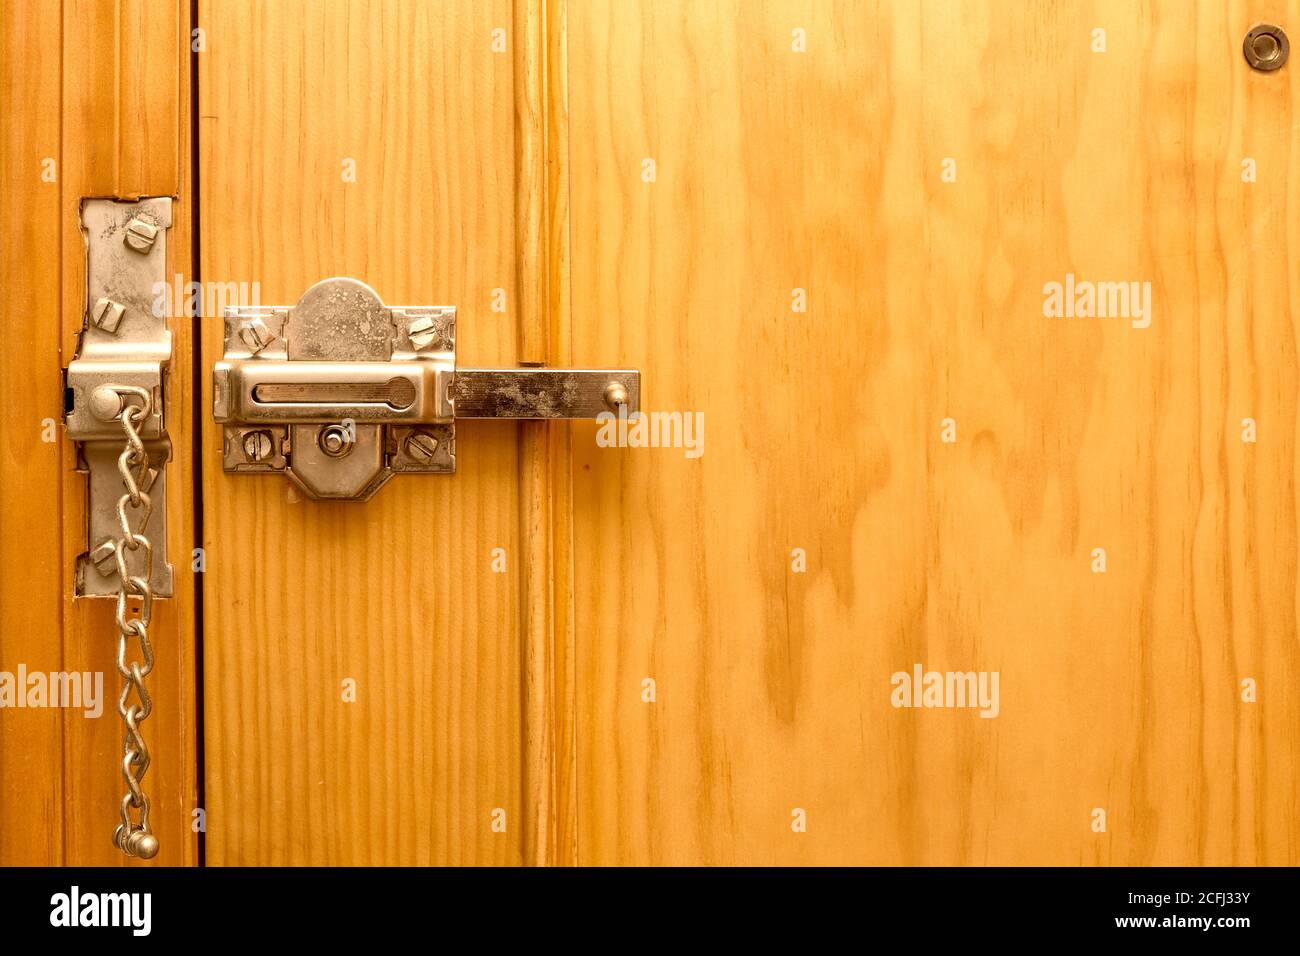 manual metal latch with chain on a wooden door Stock Photo